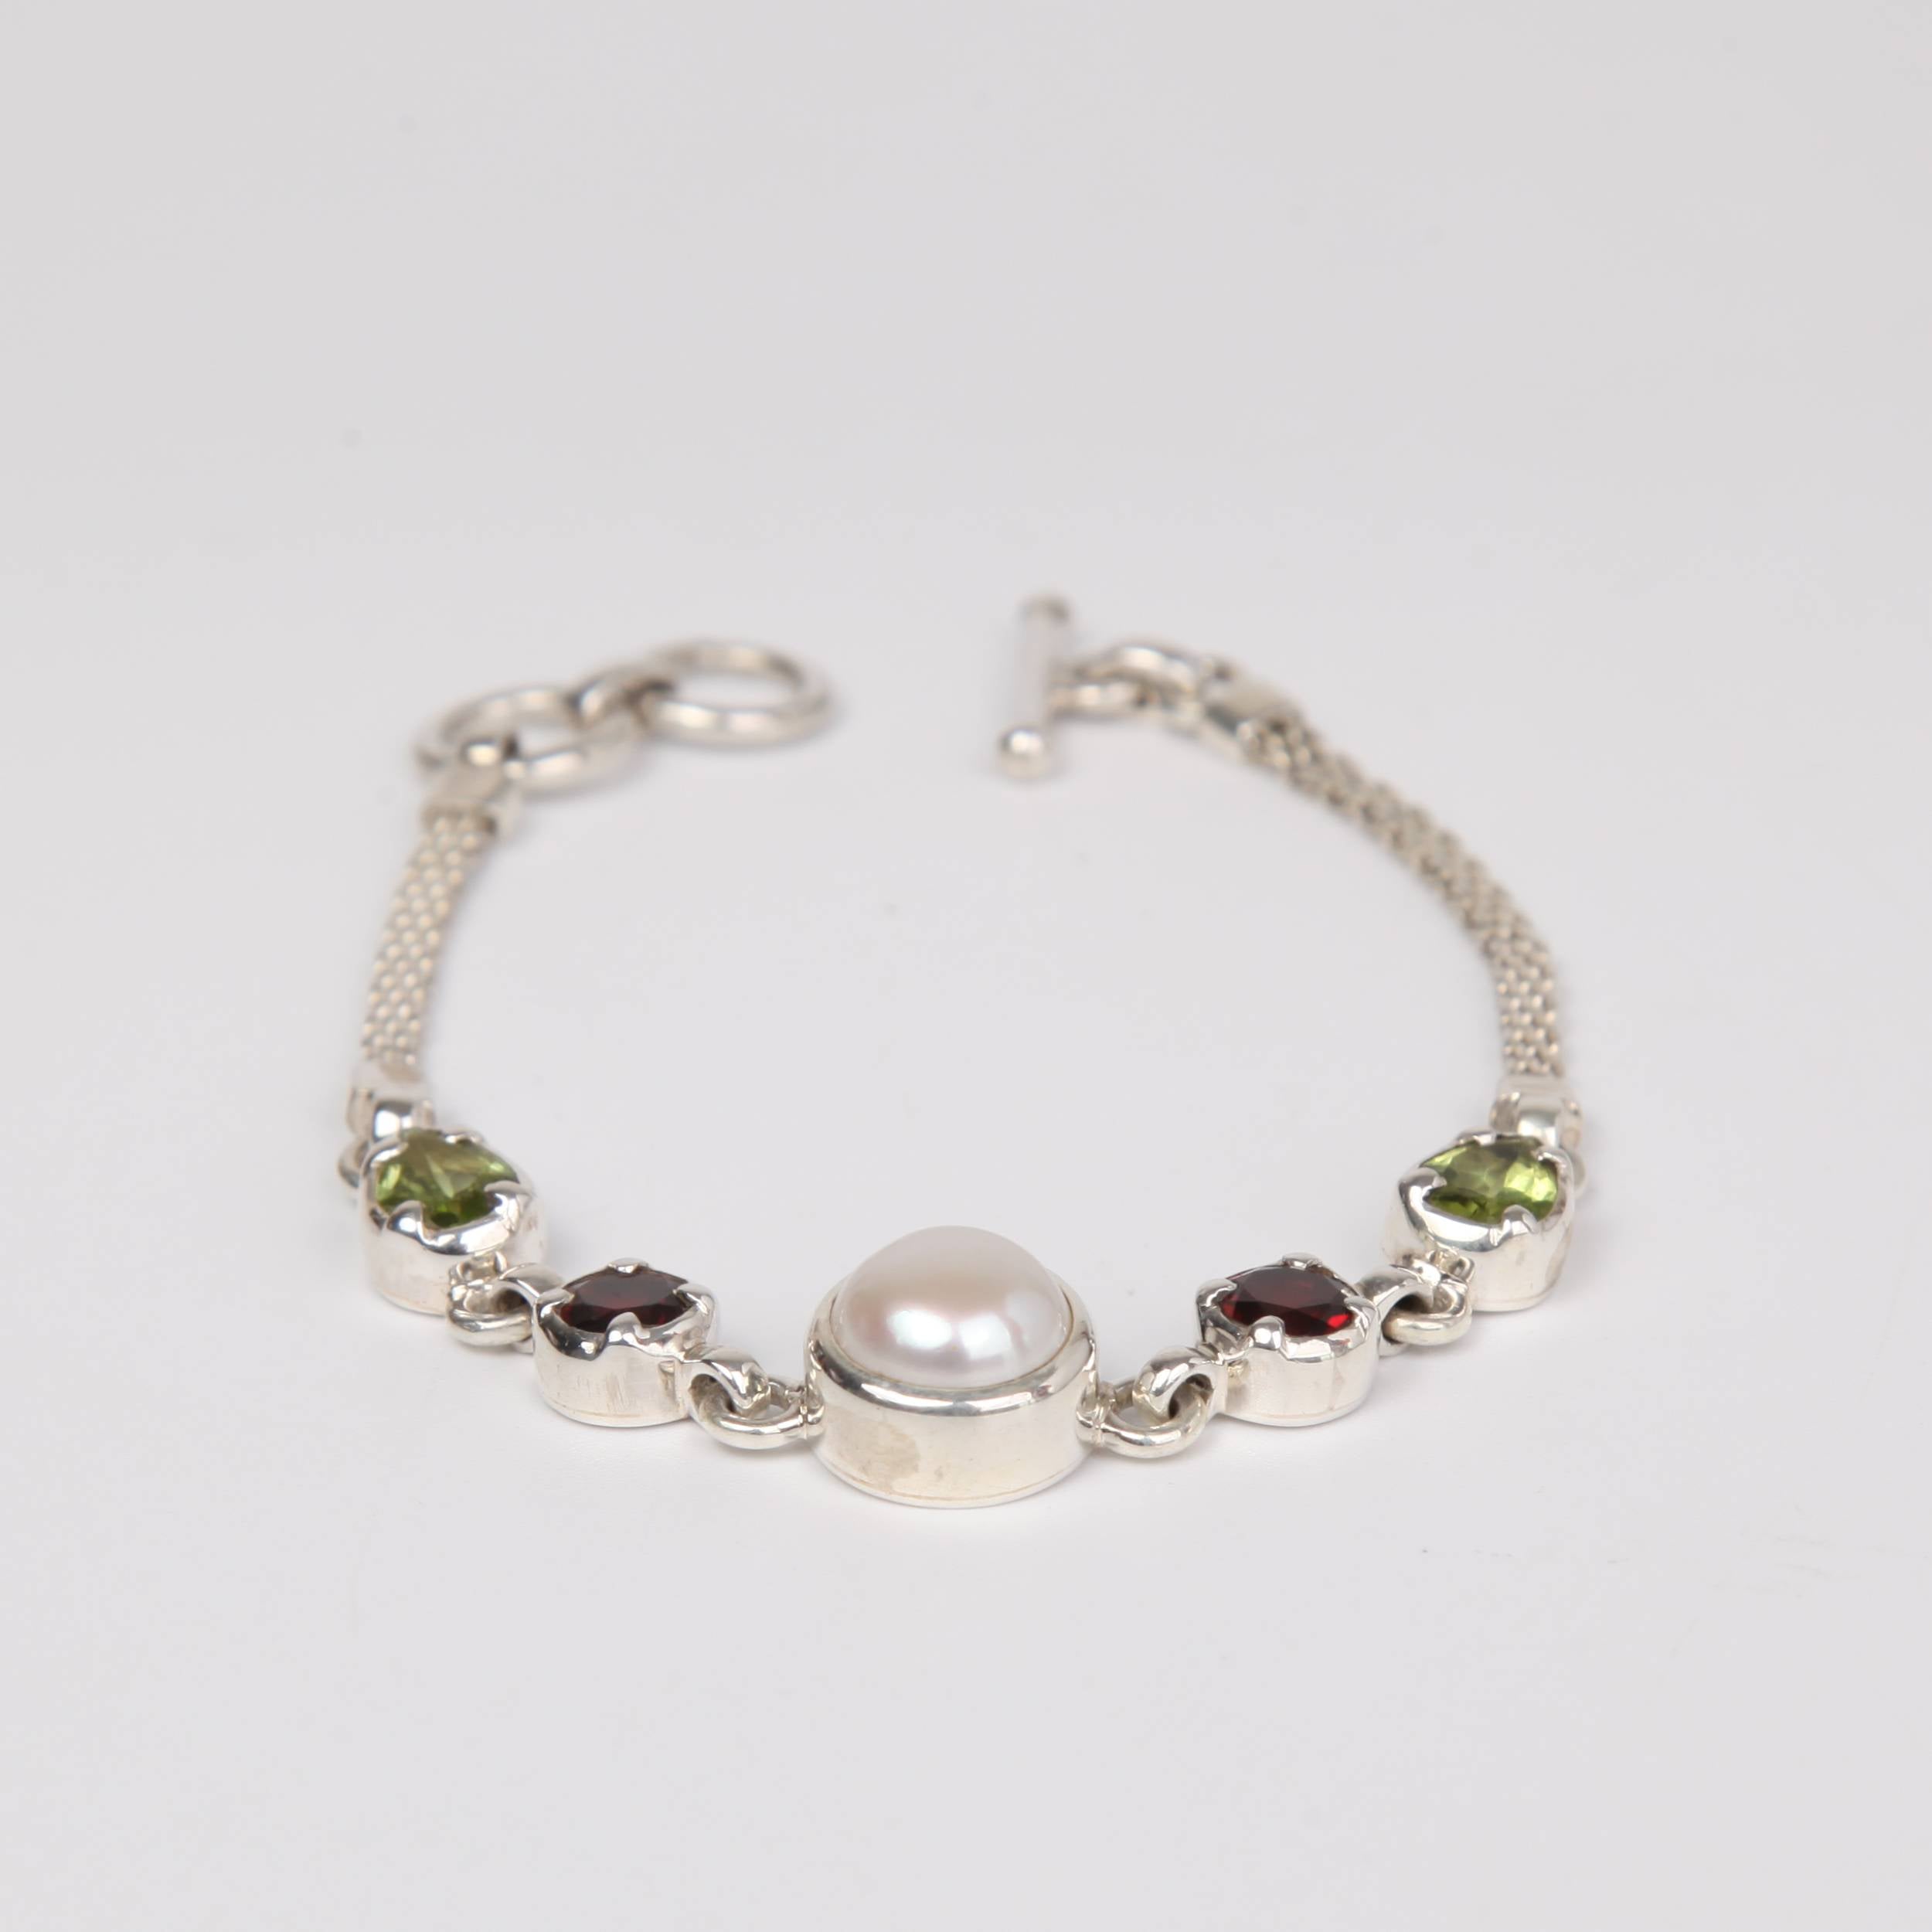 Sterling Silver Bracelet with Fresh Water Pearl, Garnet and Peridot